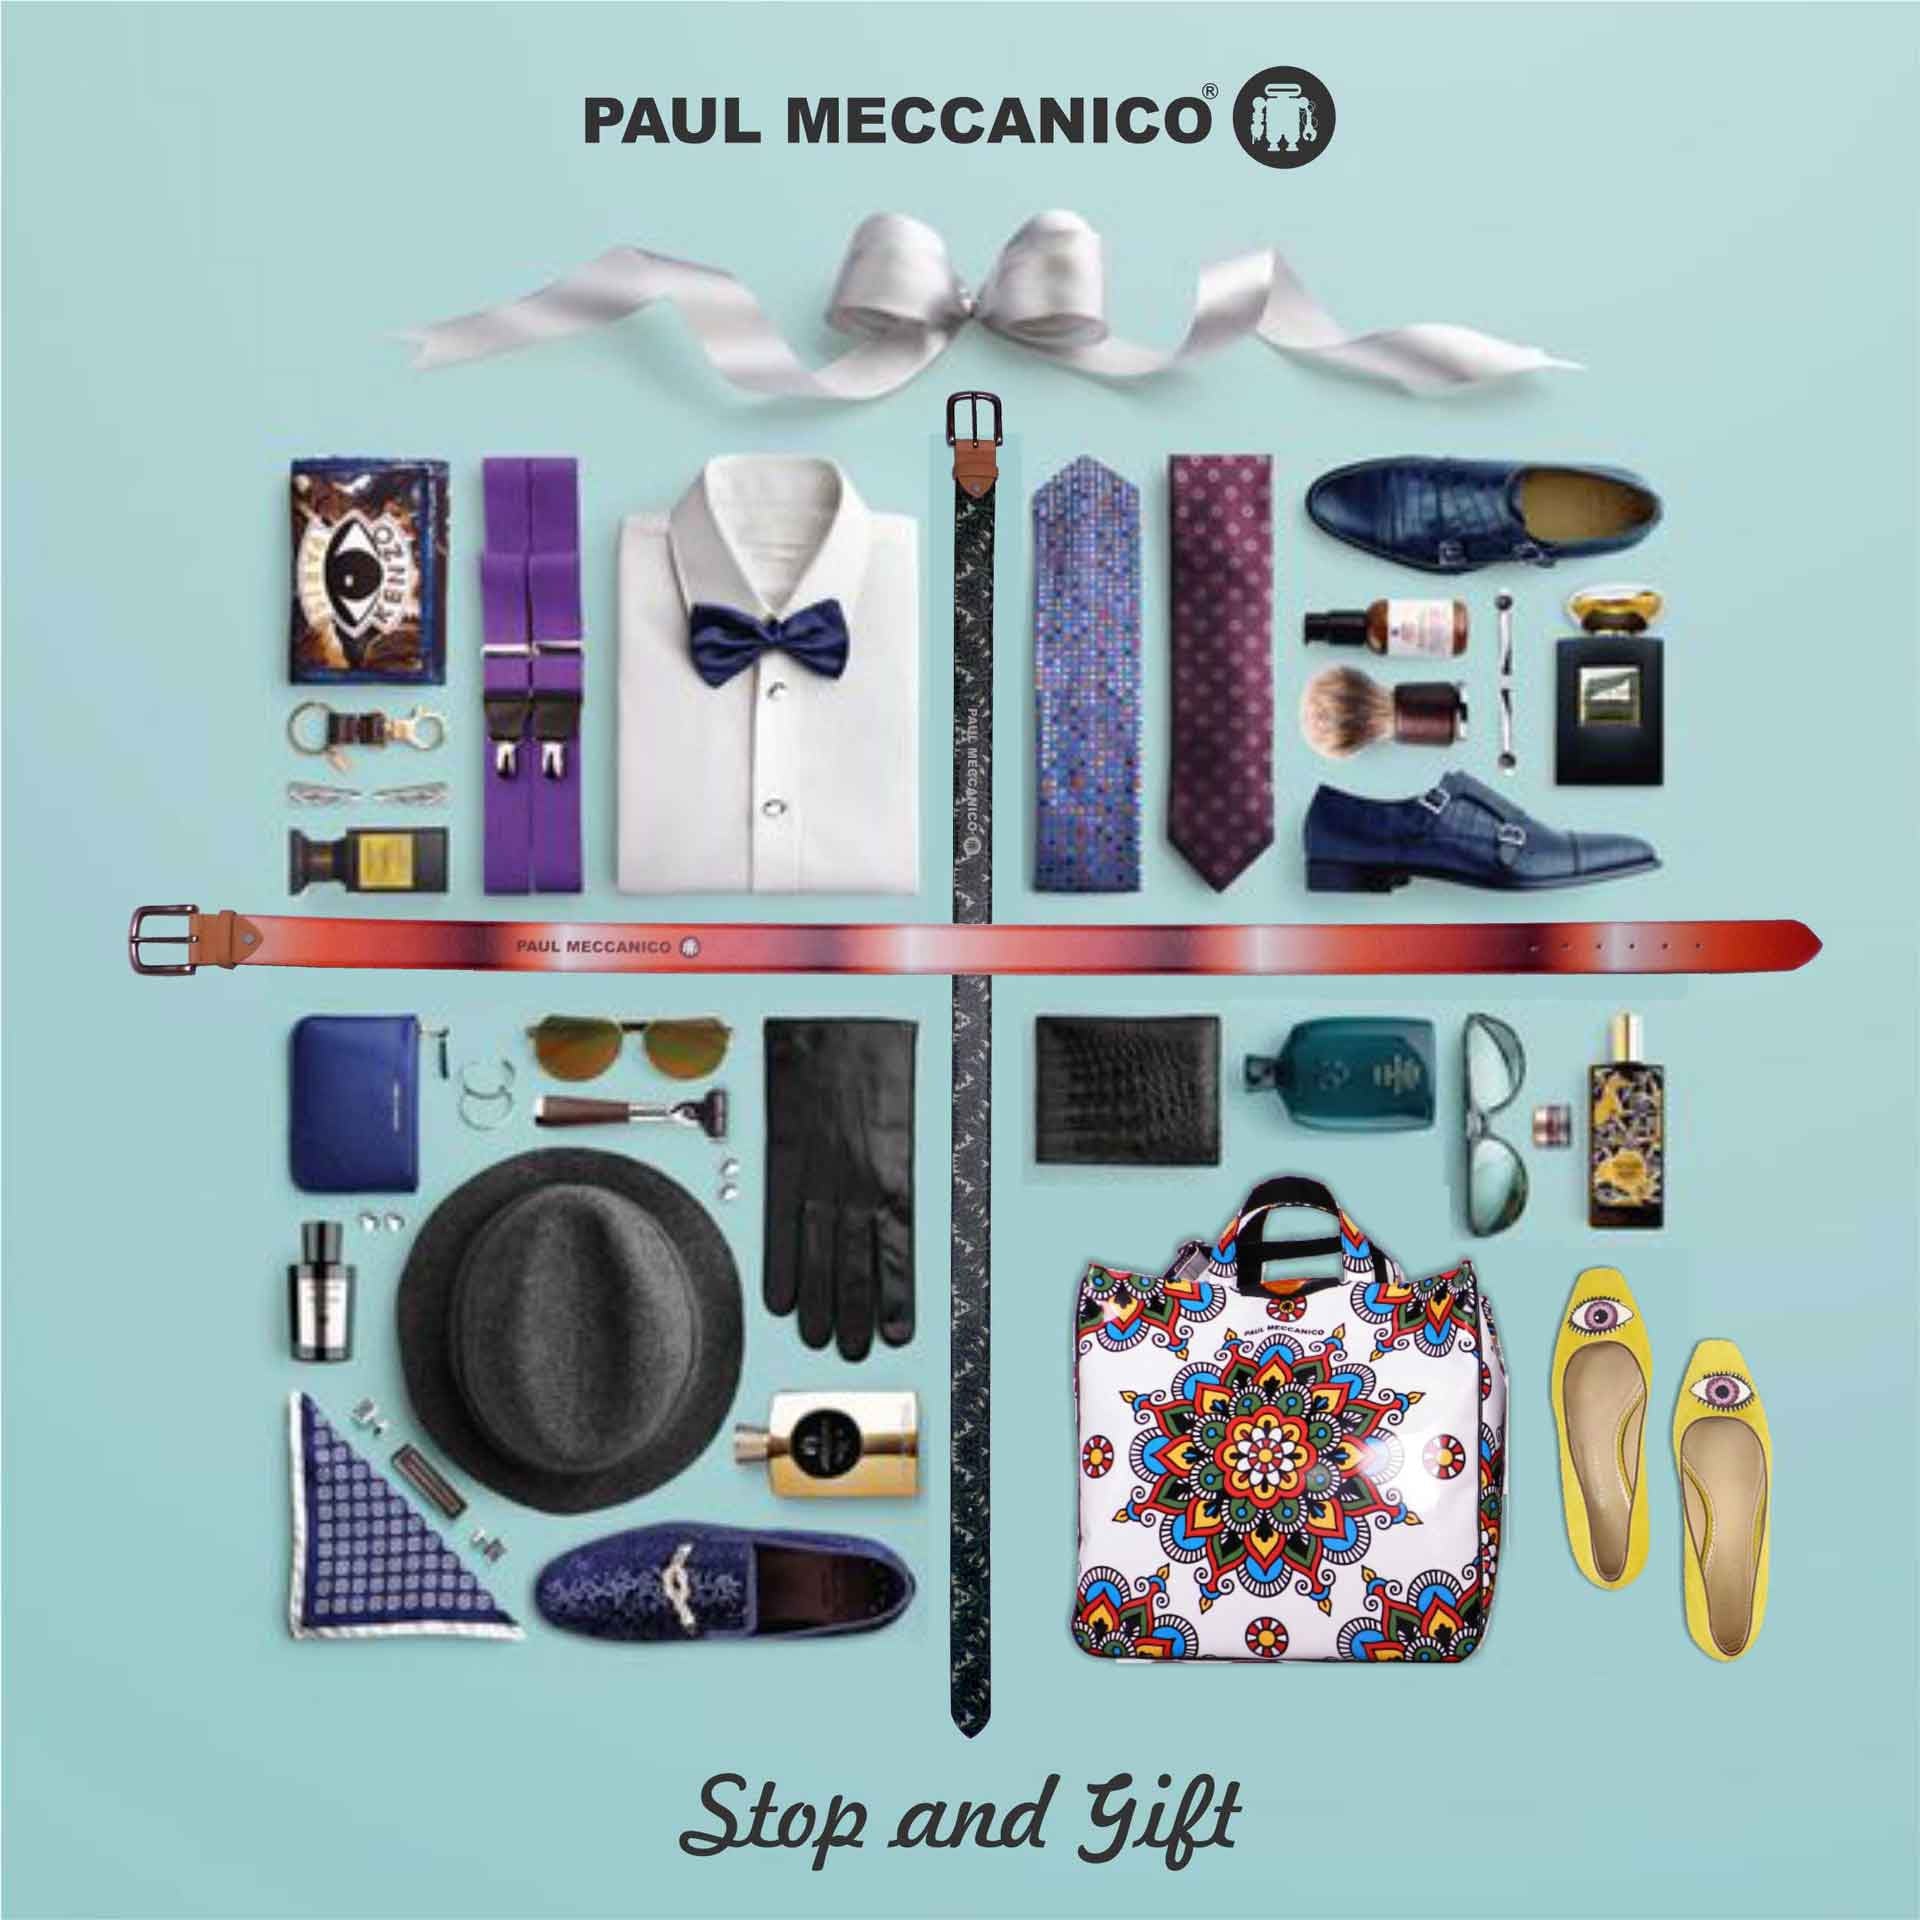 The best gift to give is a UNIQUE PIECE-Paul Meccanico